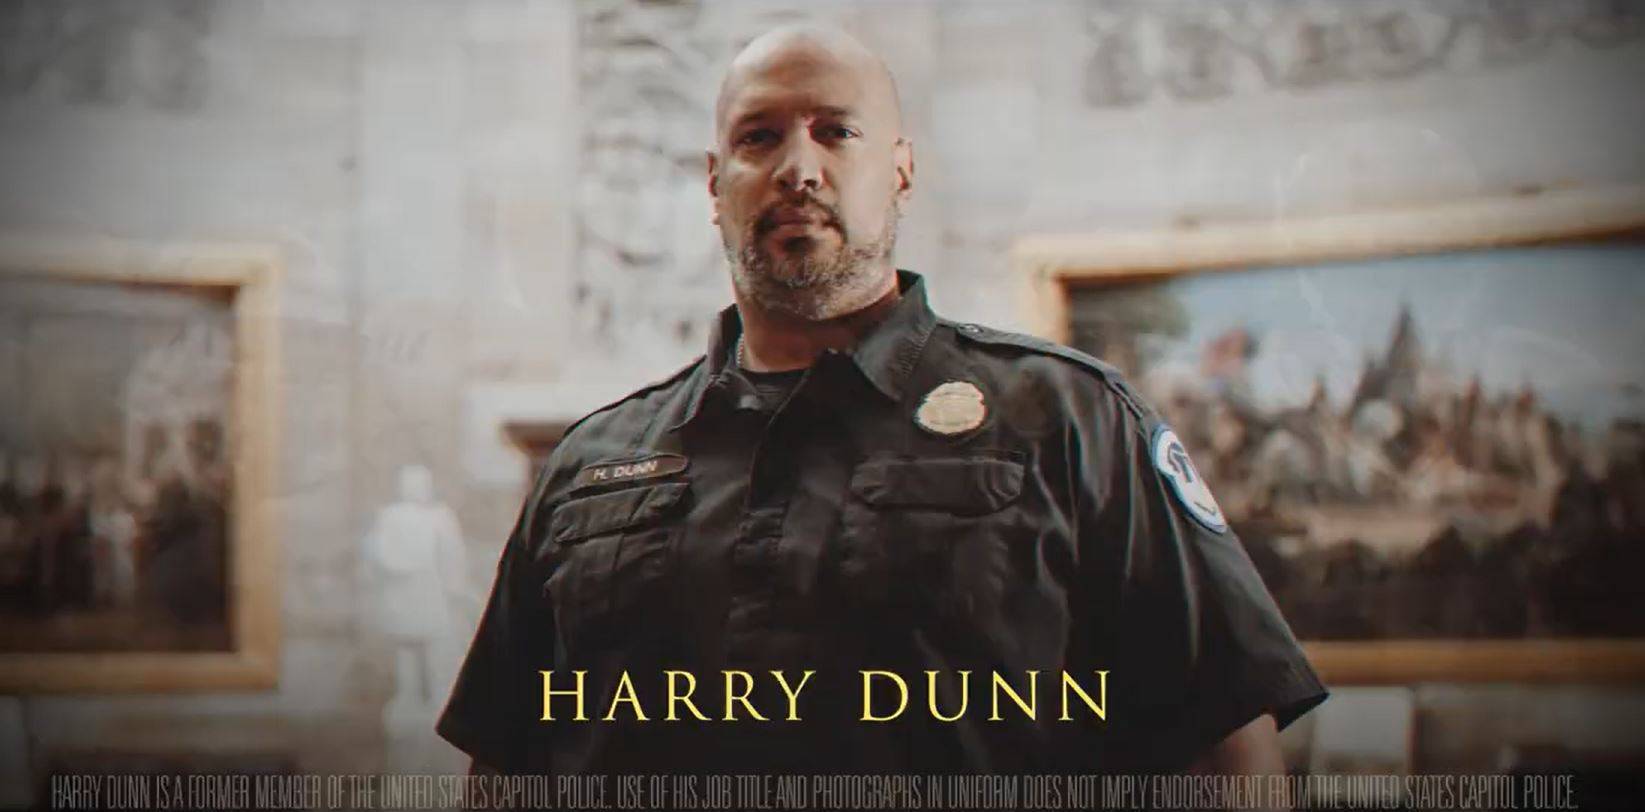 Harry Dunn, a Democrat running for Maryland's 3rd Congressional District, is shown in a screenshot from a campaign TV commercial.